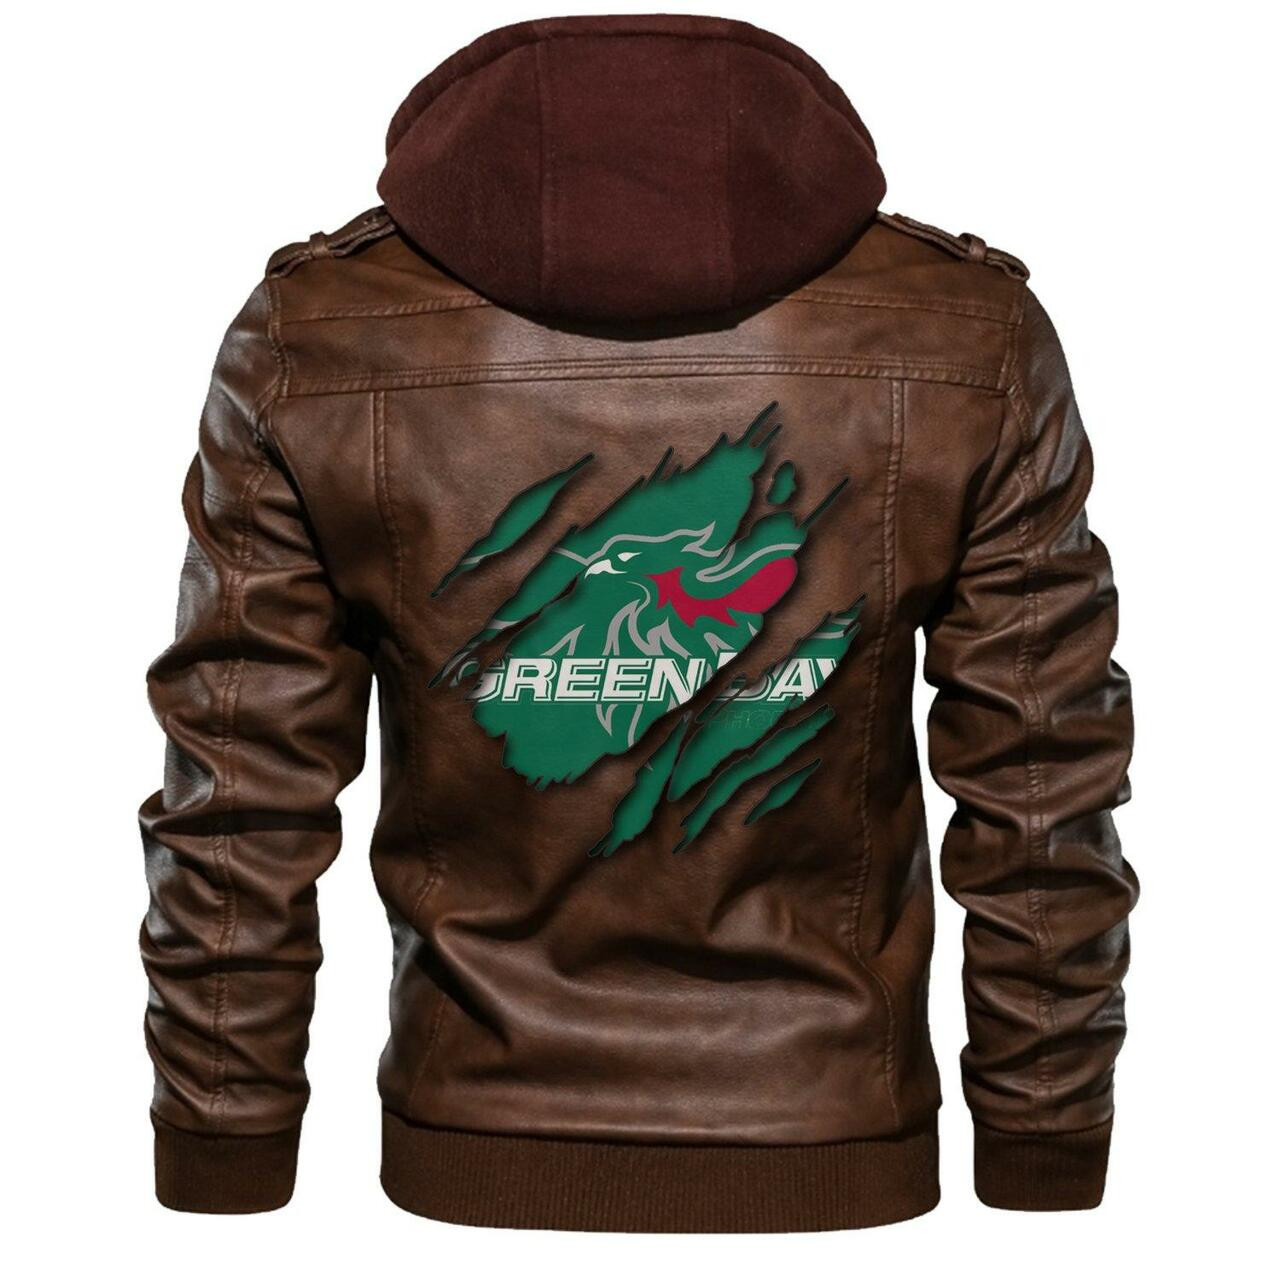 You can find Leather Jacket online at a great price 33